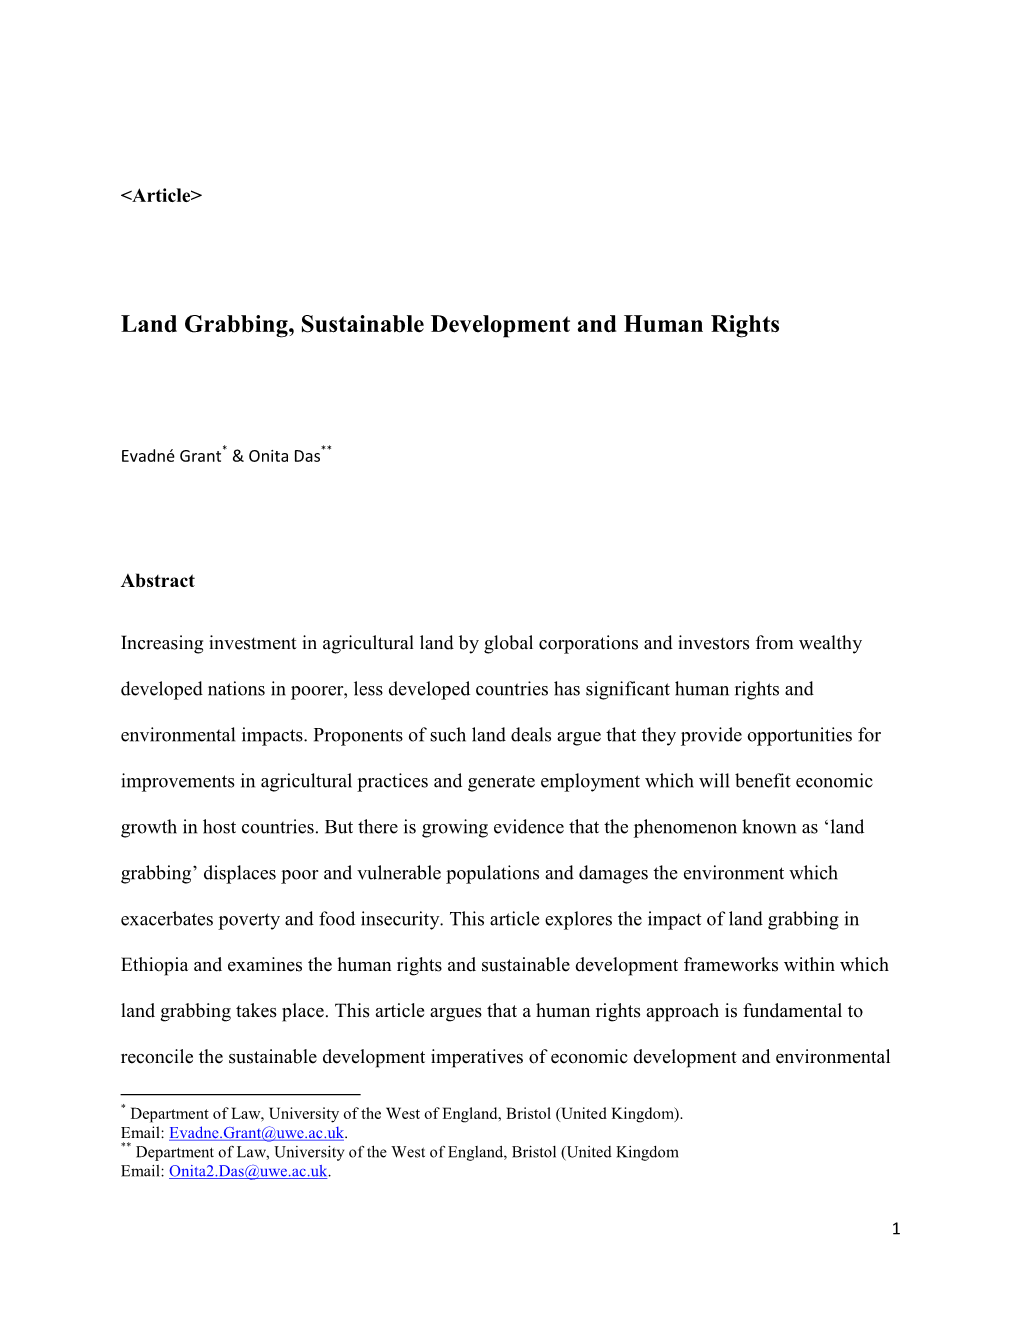 Land Grabbing, Sustainable Development and Human Rights